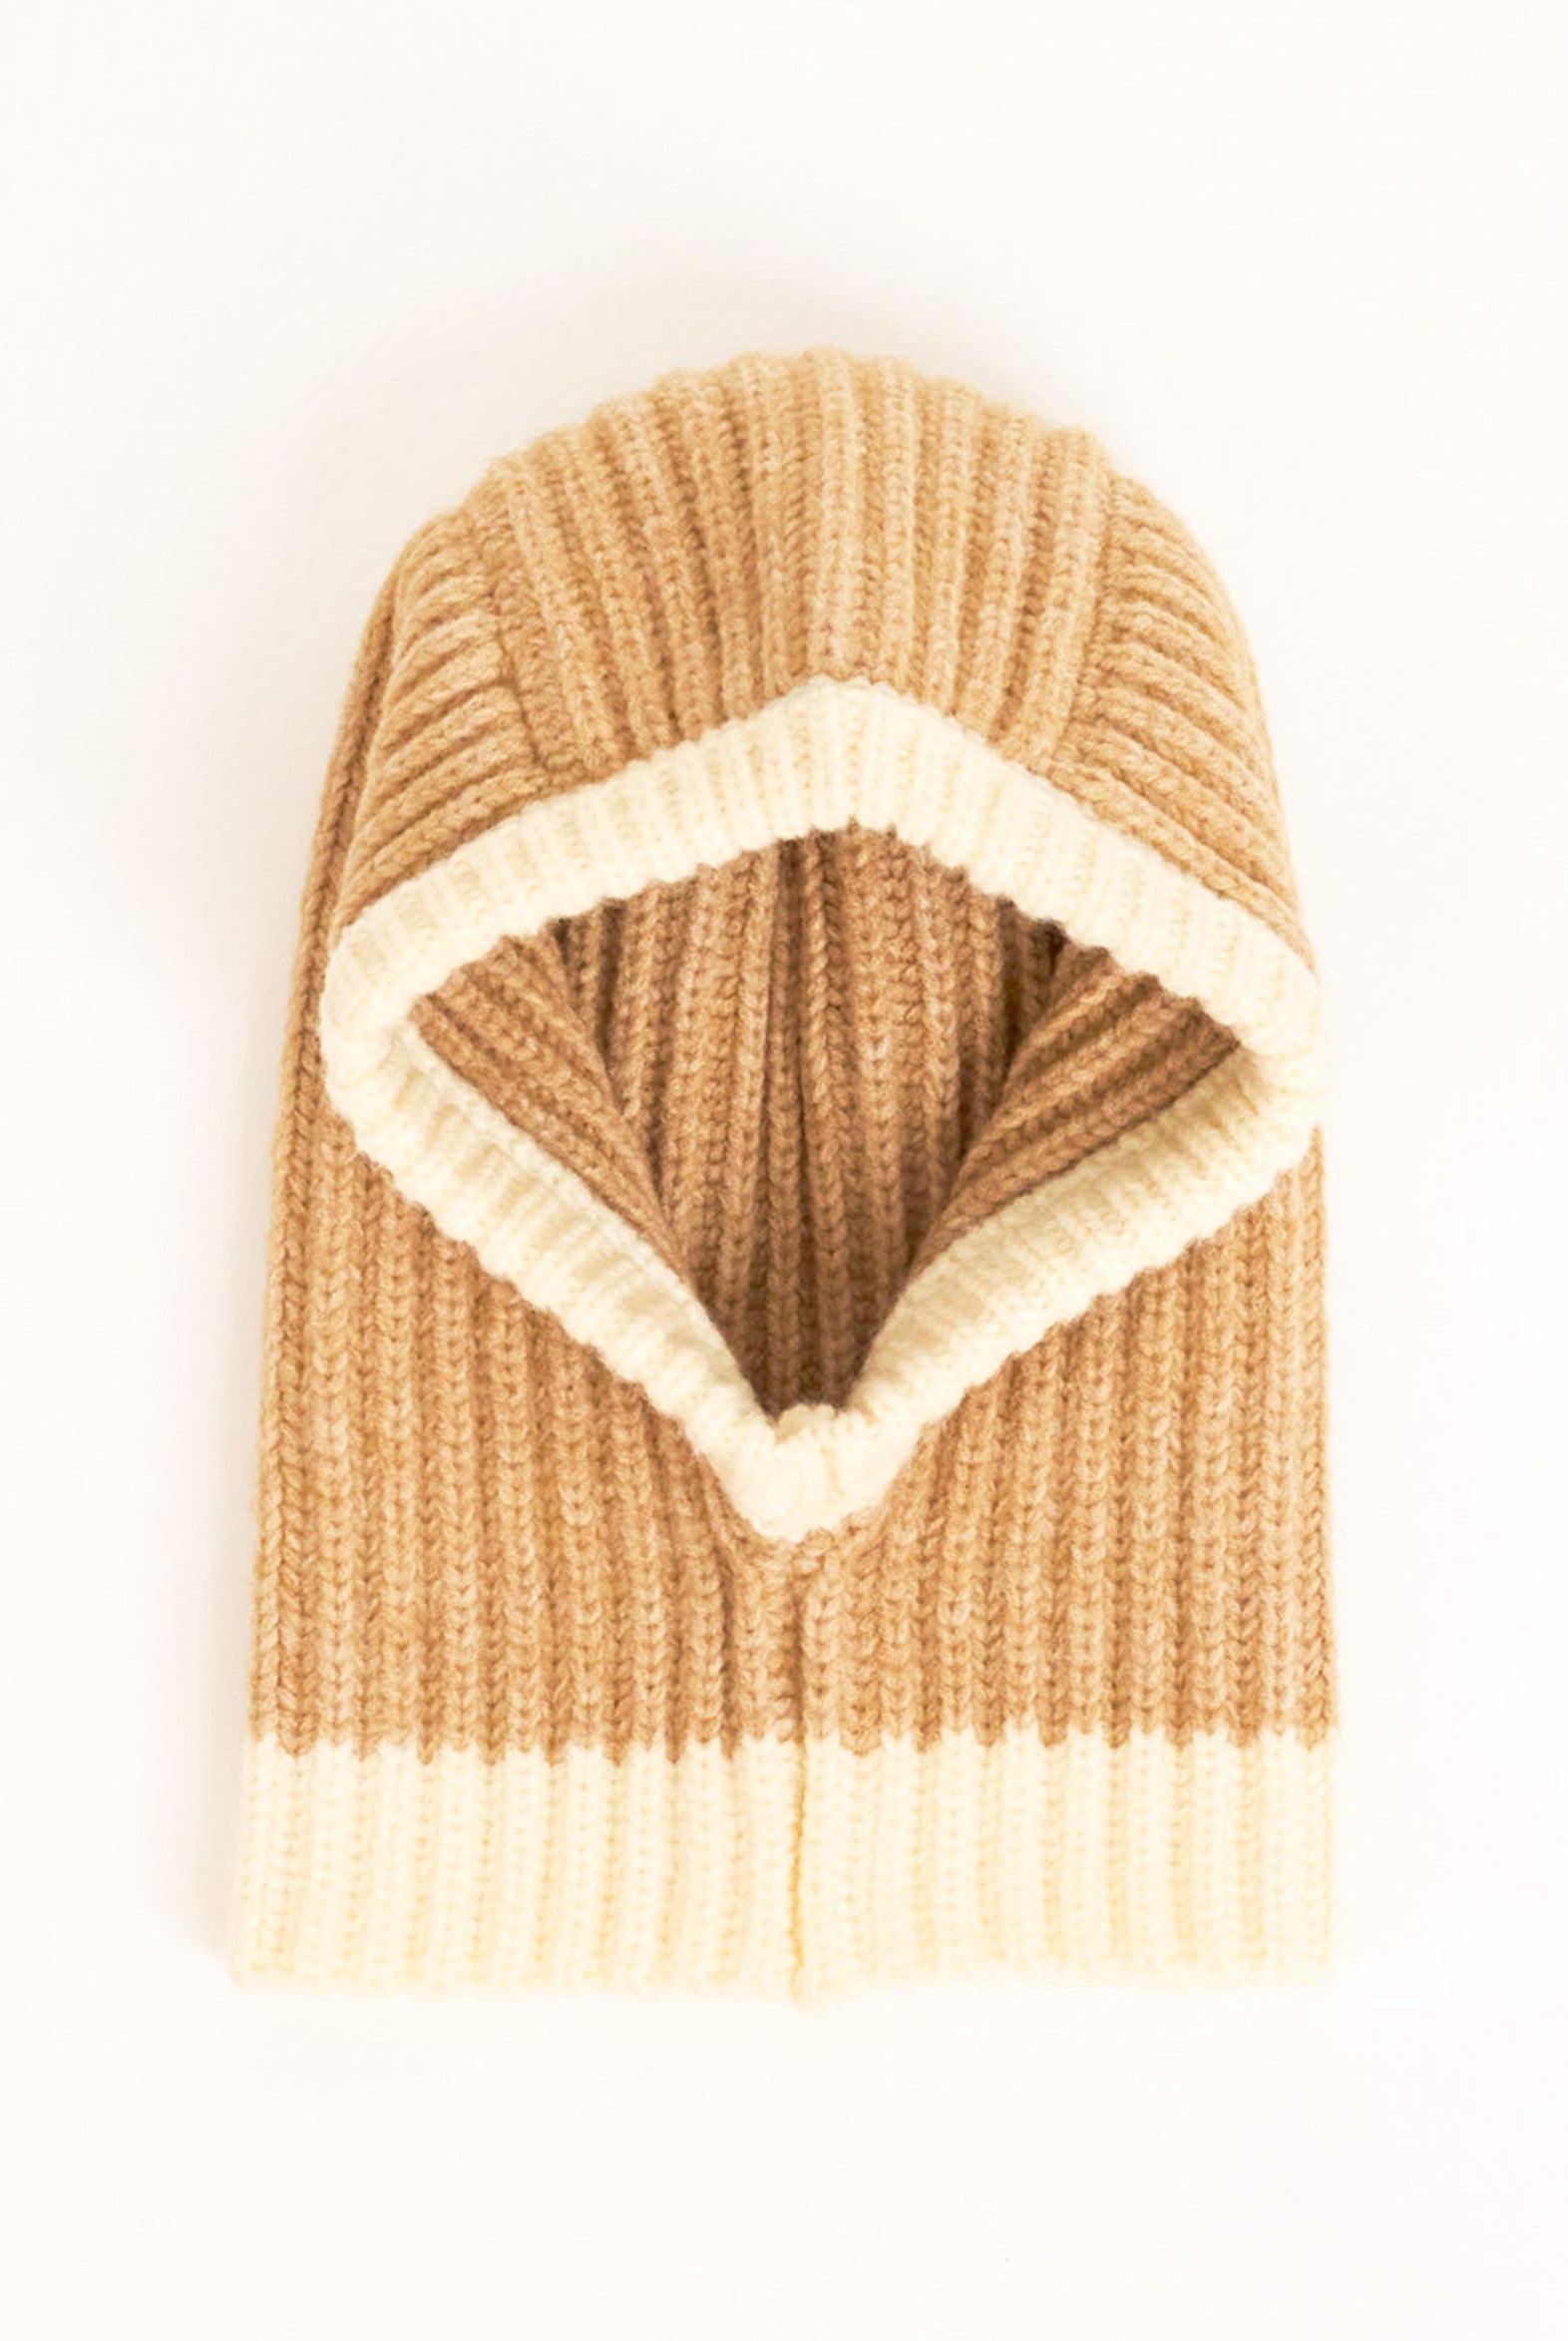 Loose Fit Ribbed Knit Balaclava in Beige | knitted | knitwear | ski | Skiing | Winter | Autumn | Plaza core | Winter Accessories | Autumn Accessories |